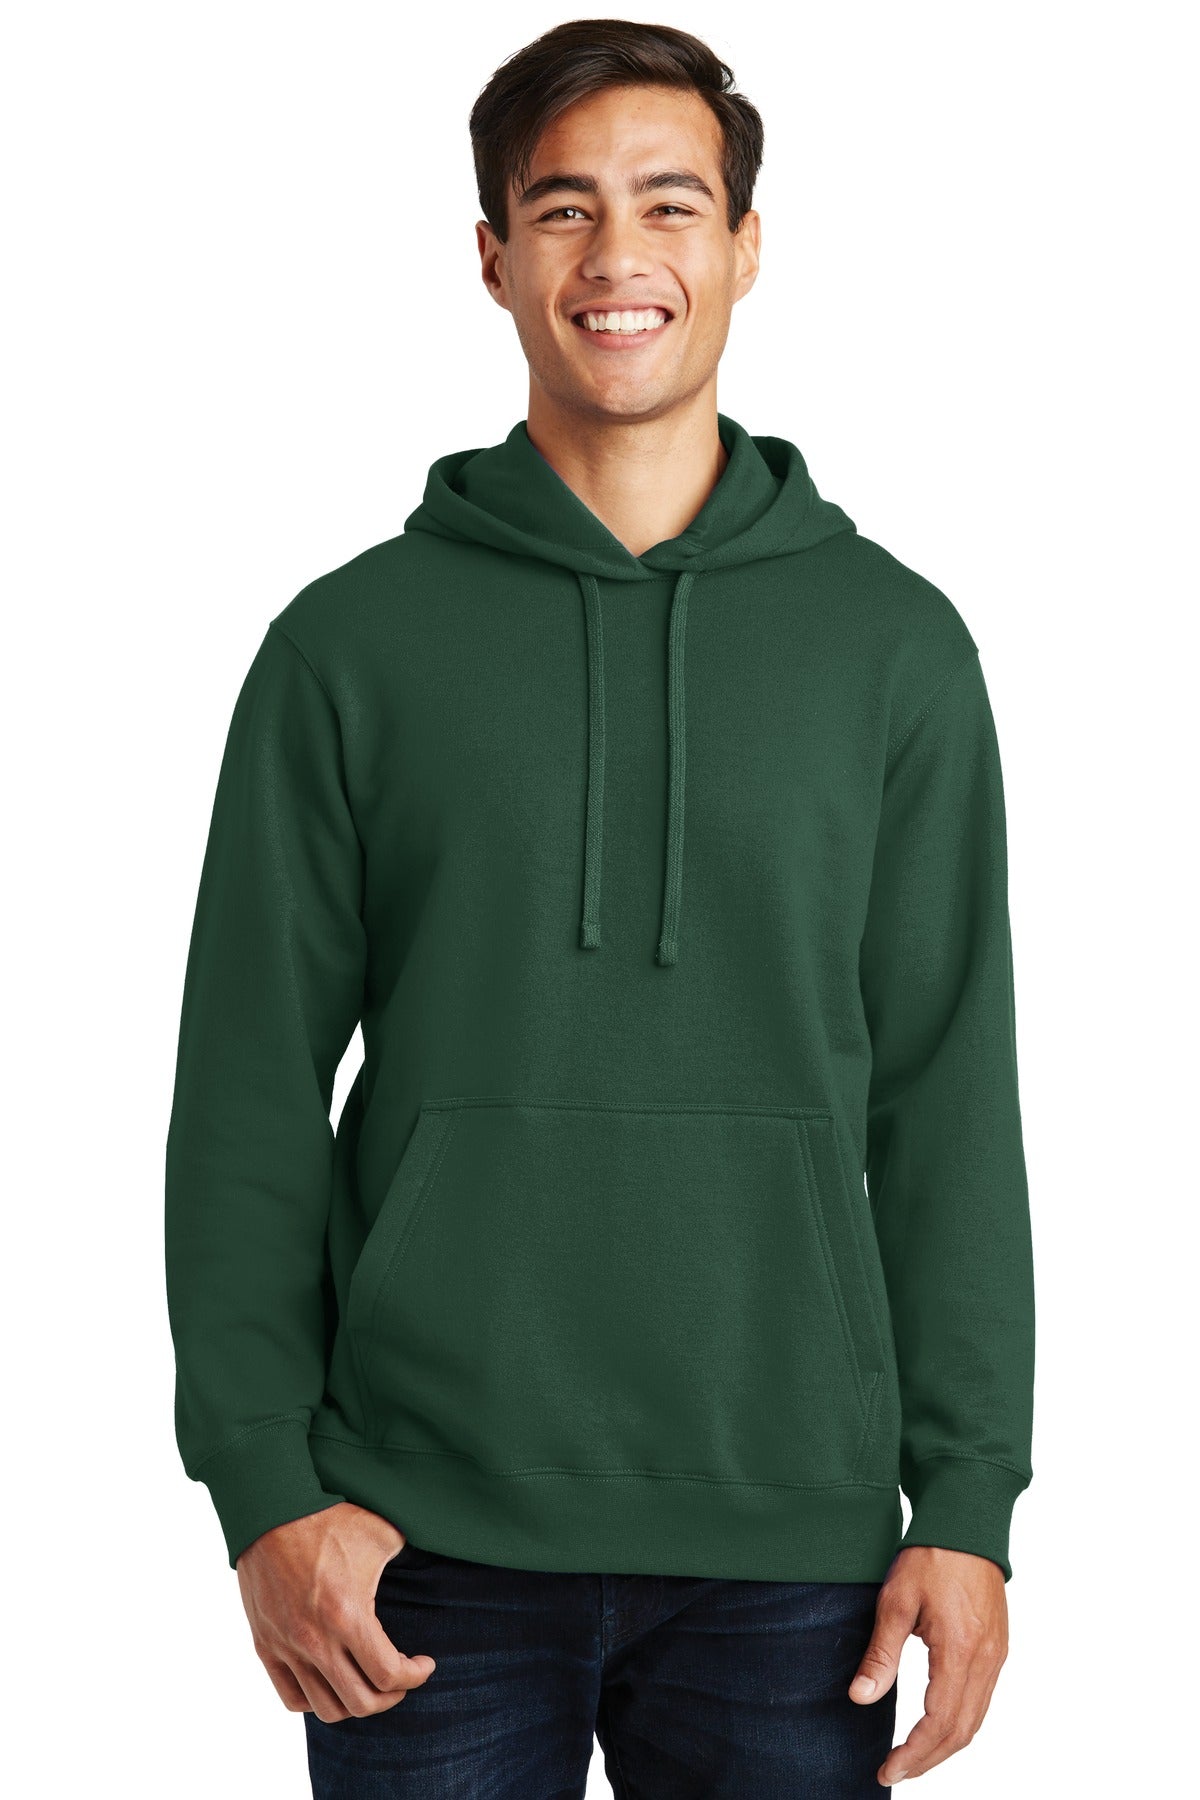 Photo of Port & Company Sweatshirts/Fleece PC850H  color  Forest Green